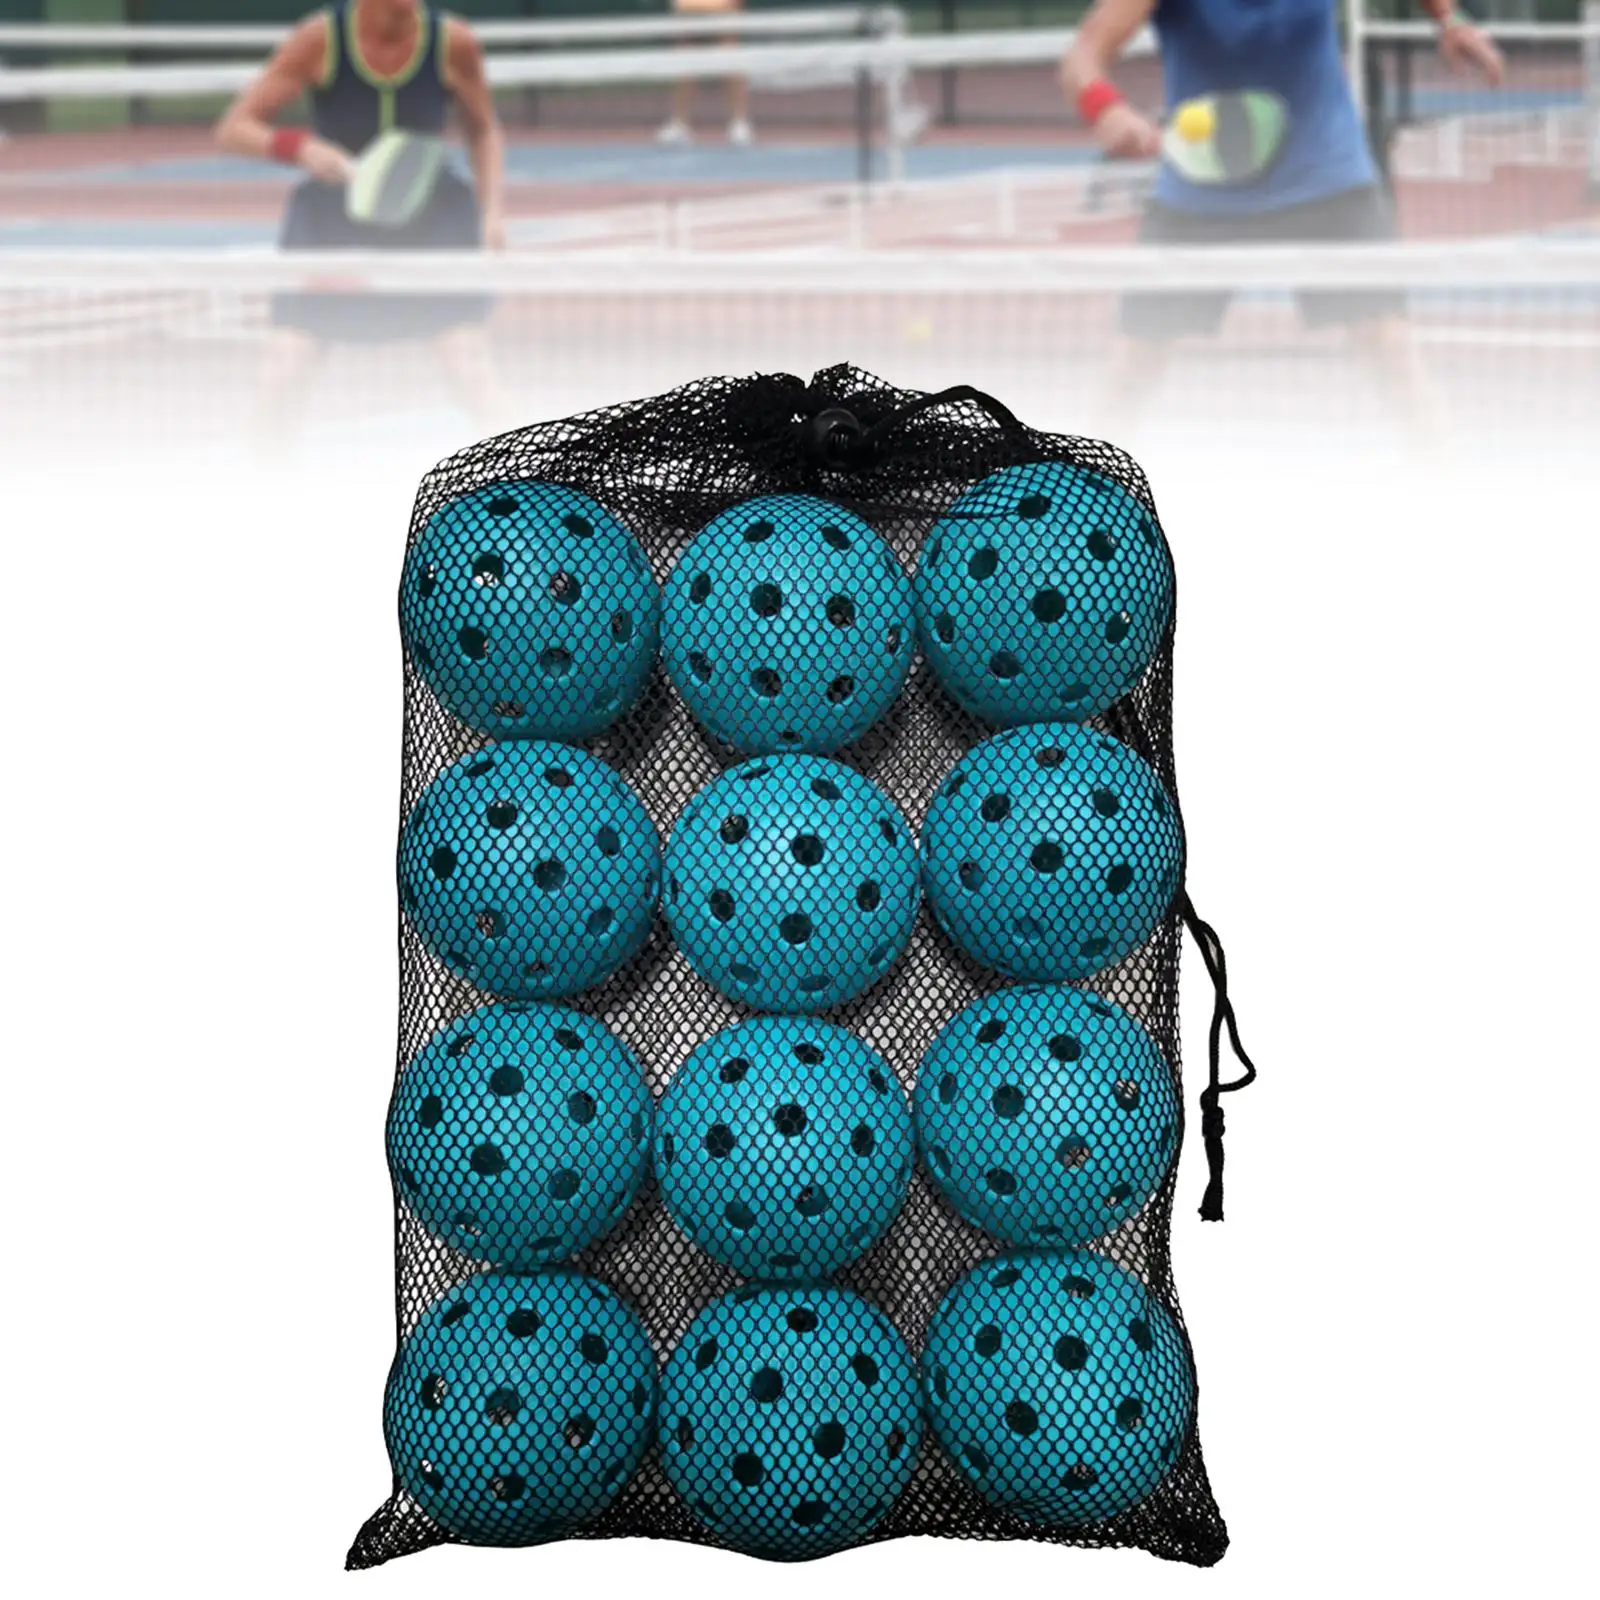 12x Pickleball Balls Training Pickleball Durable 40 Holes Professional Adult Accessories Competition Ball for Indoor Outdoor